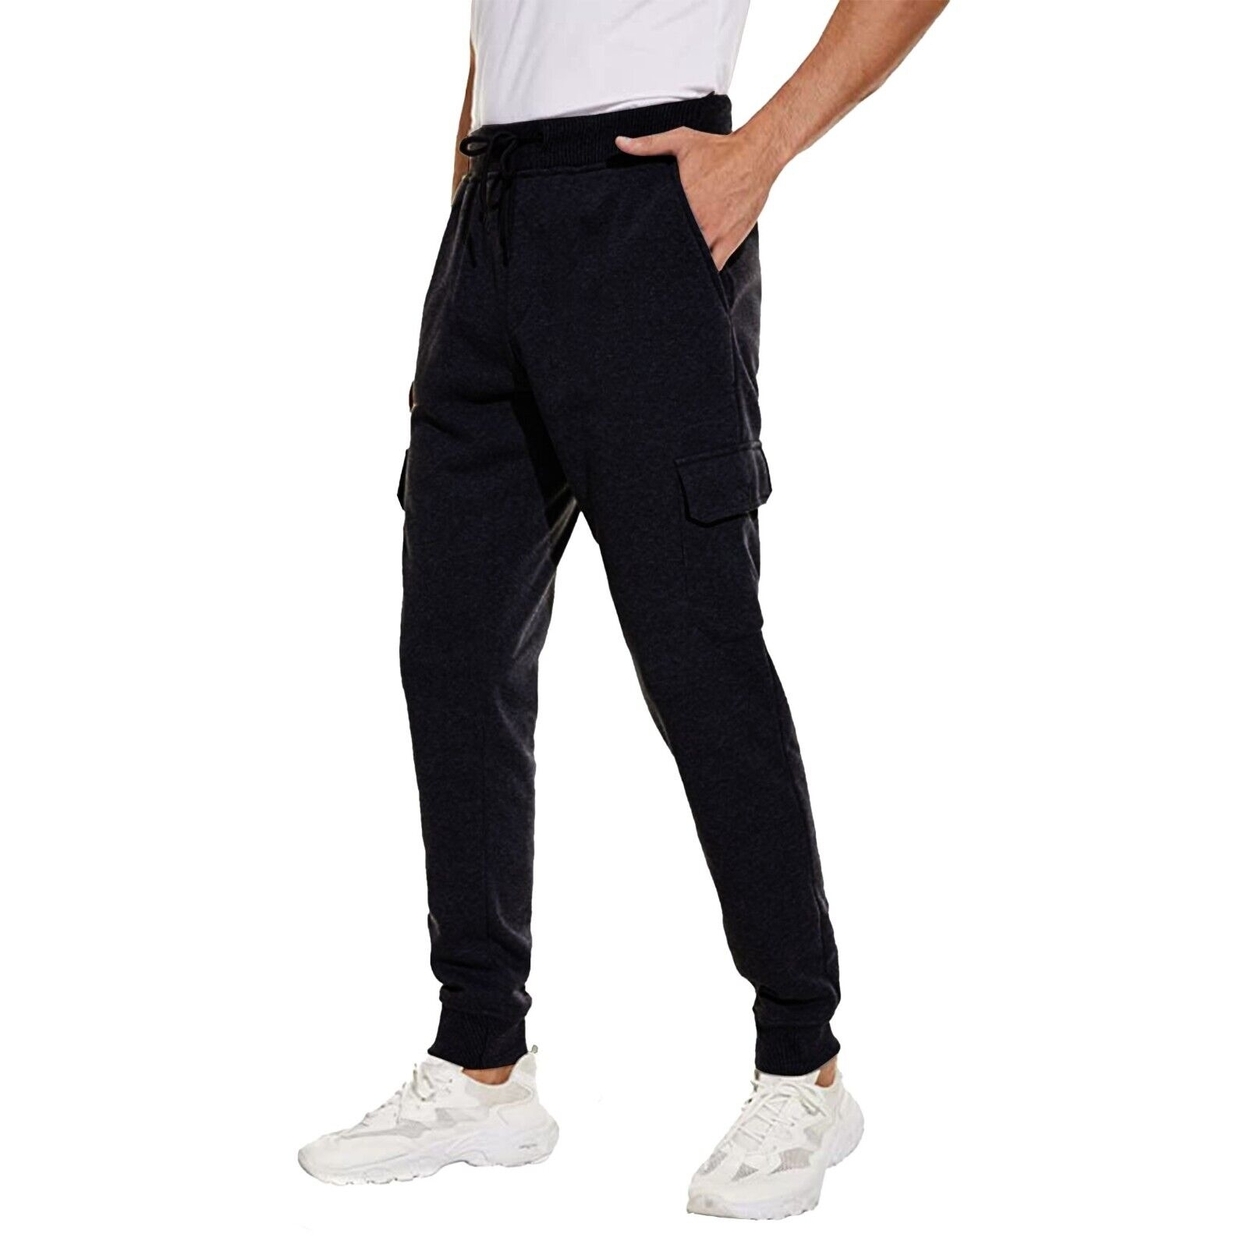 Men's Ultra Soft Winter Warm Thick Sweat Pant Athletic Sherpa Lined Jogger Pants - Navy, Xx-large